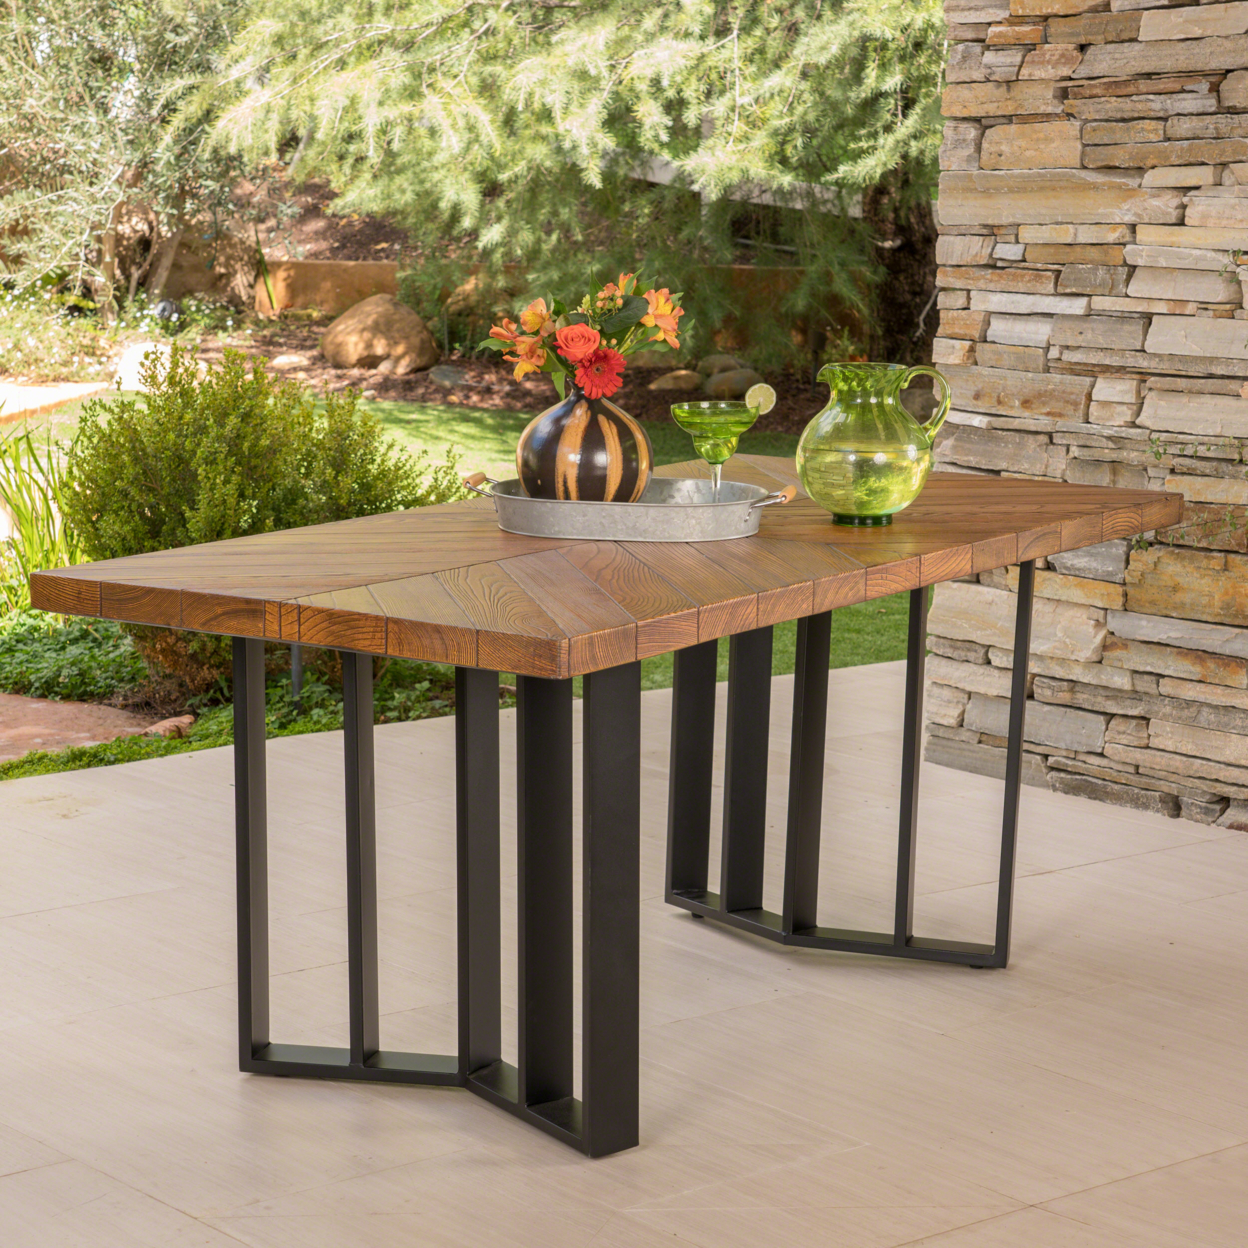 Santa Rosa Outdoor Finish Light Weight Concrete Dining Table - Textured Brown